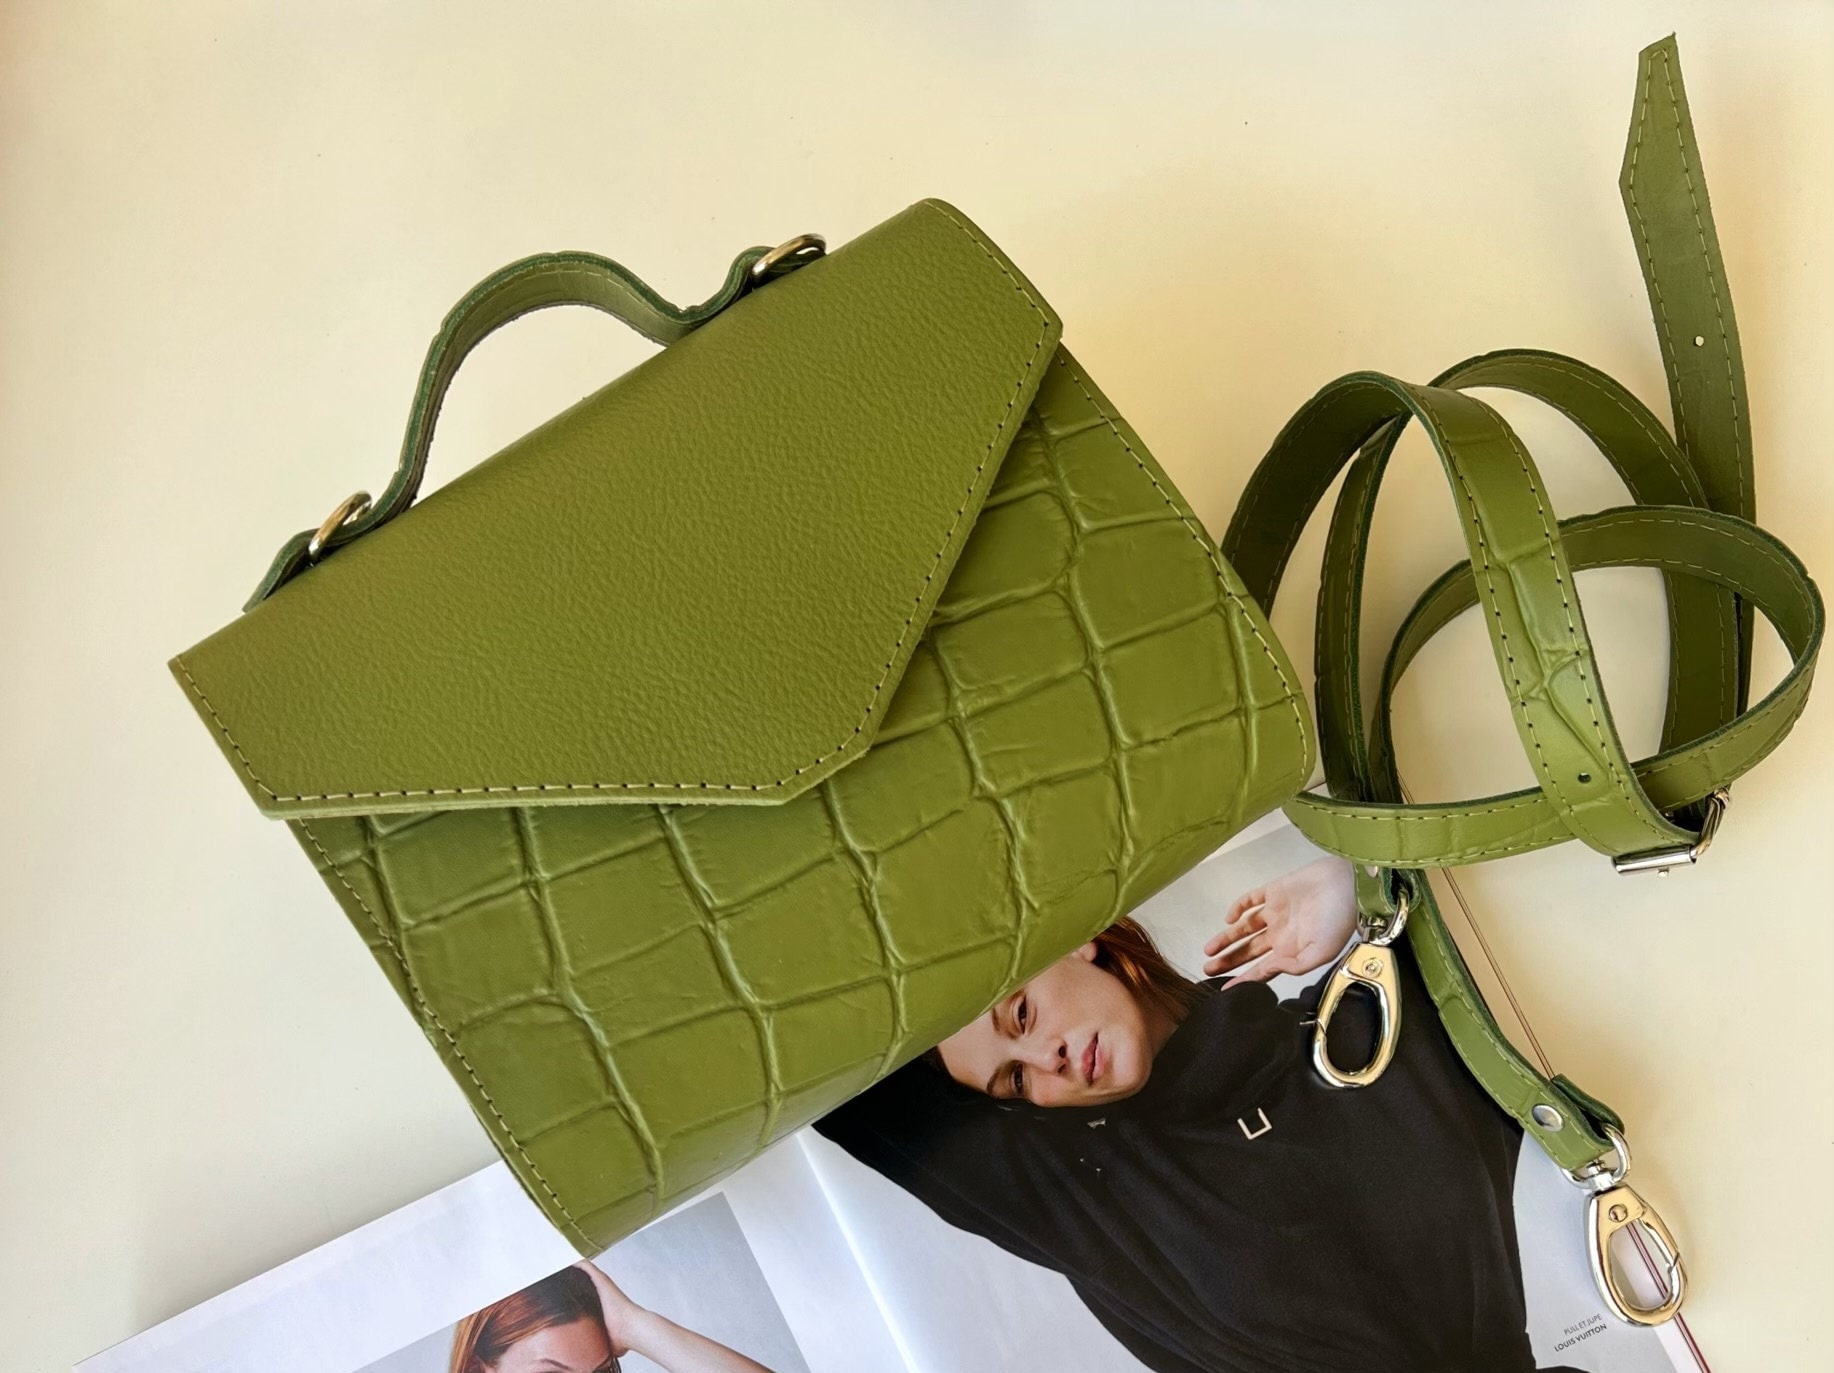 Thoughts on the green puzzle bag? : r/handbags